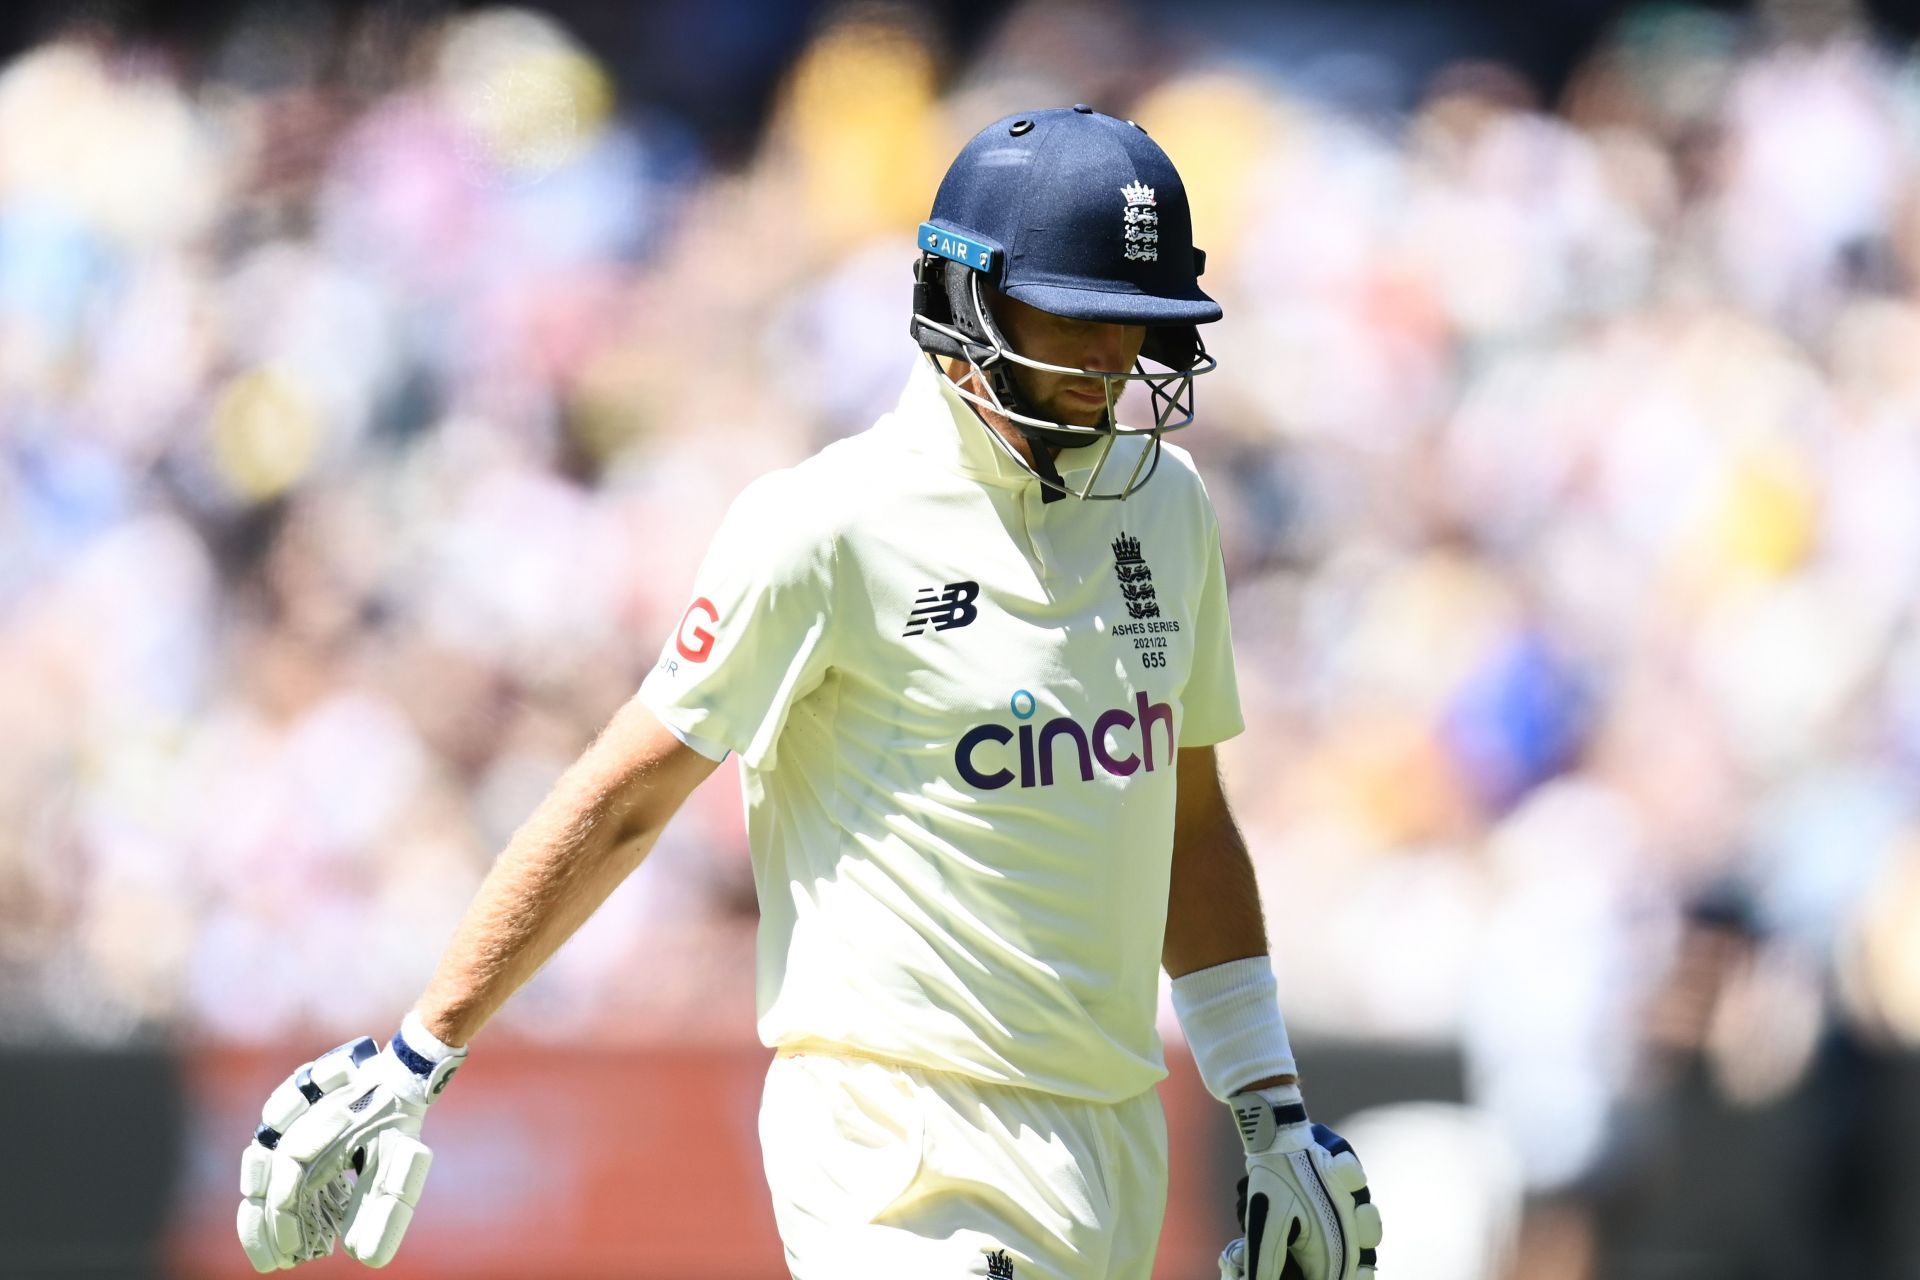 England lost to Australia in the third Test to go 0-3 down in The Ashes.